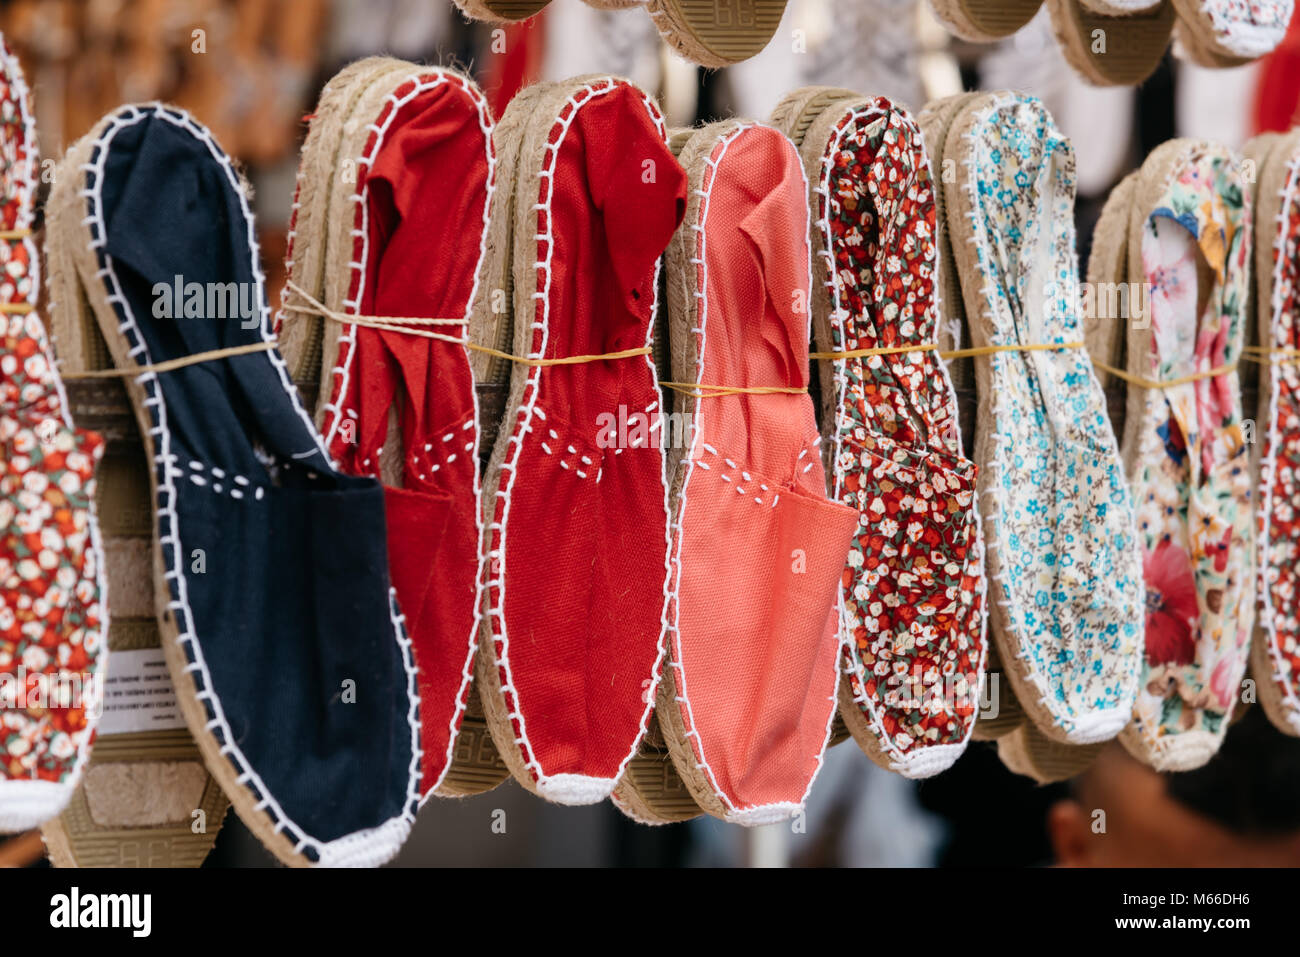 Colorful spanish handmade rope soled sandals or espadrilles in market stall  Stock Photo - Alamy